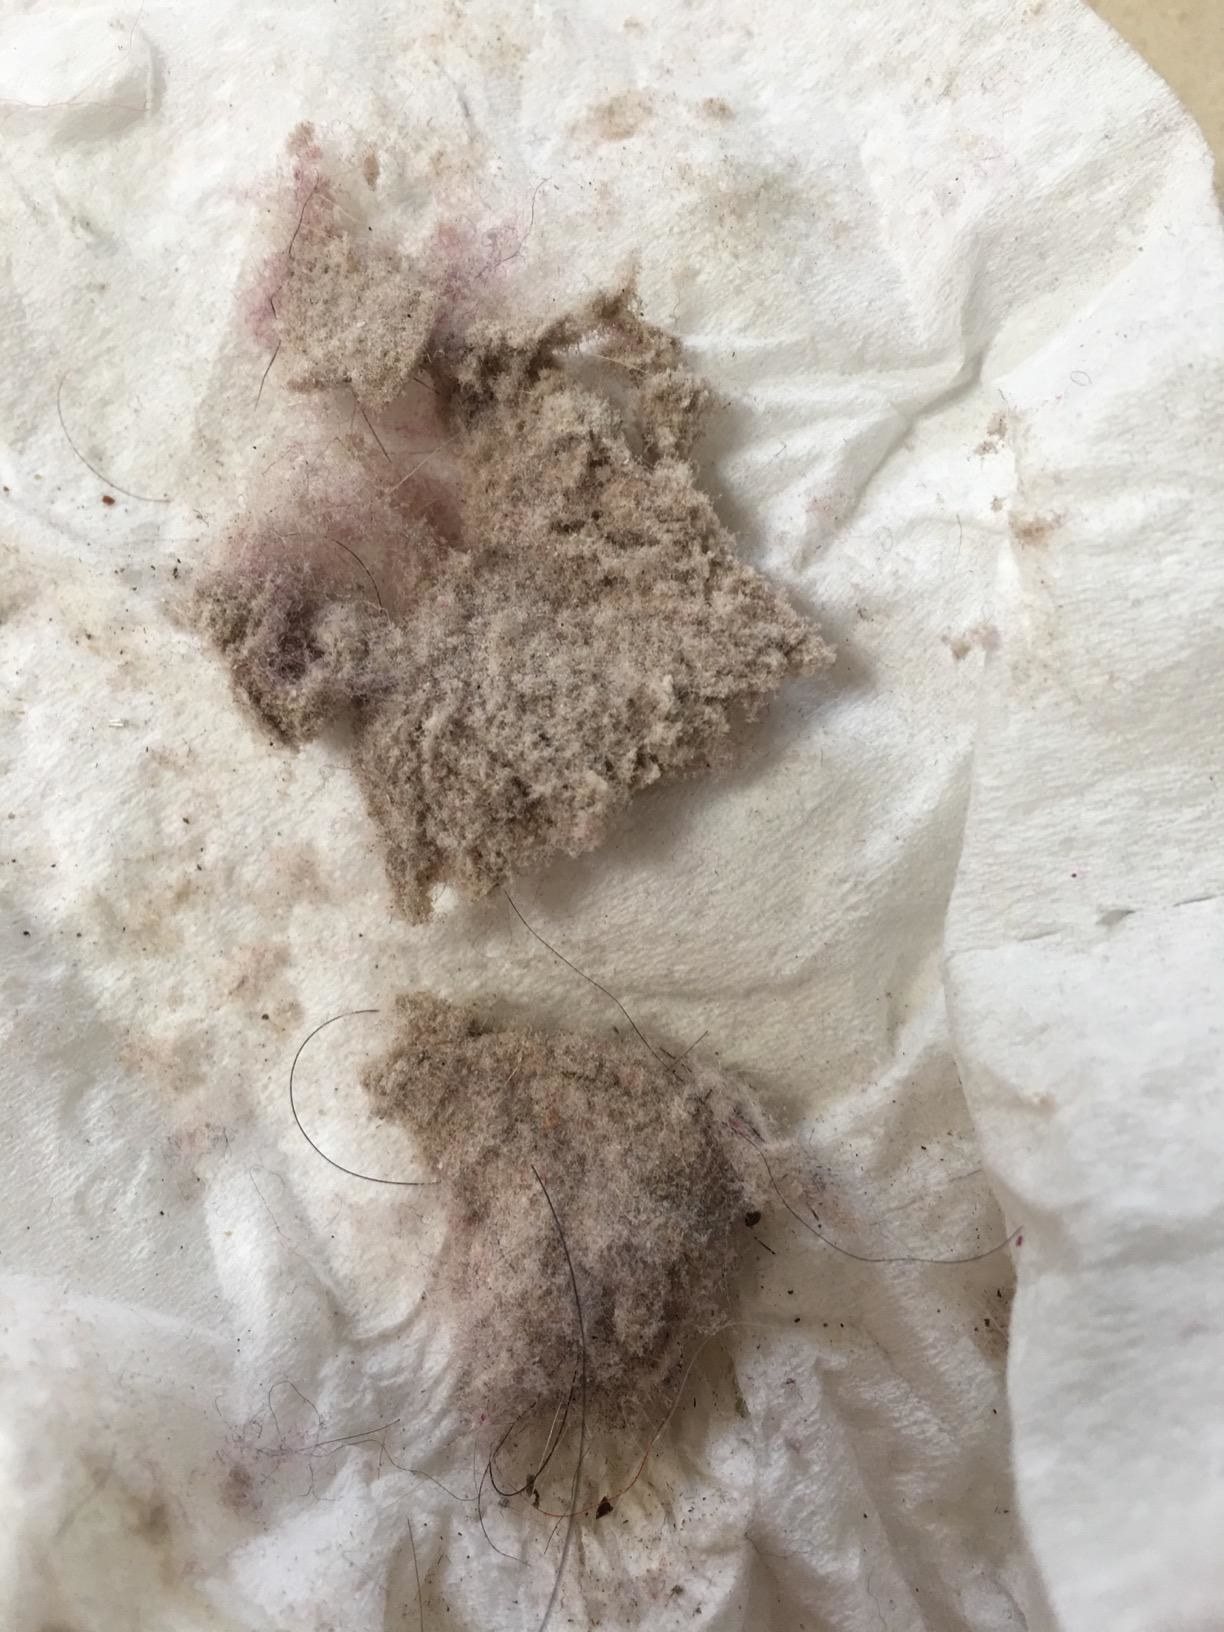 reviewer image of a mound of dirt, dust, and hair from their mattress